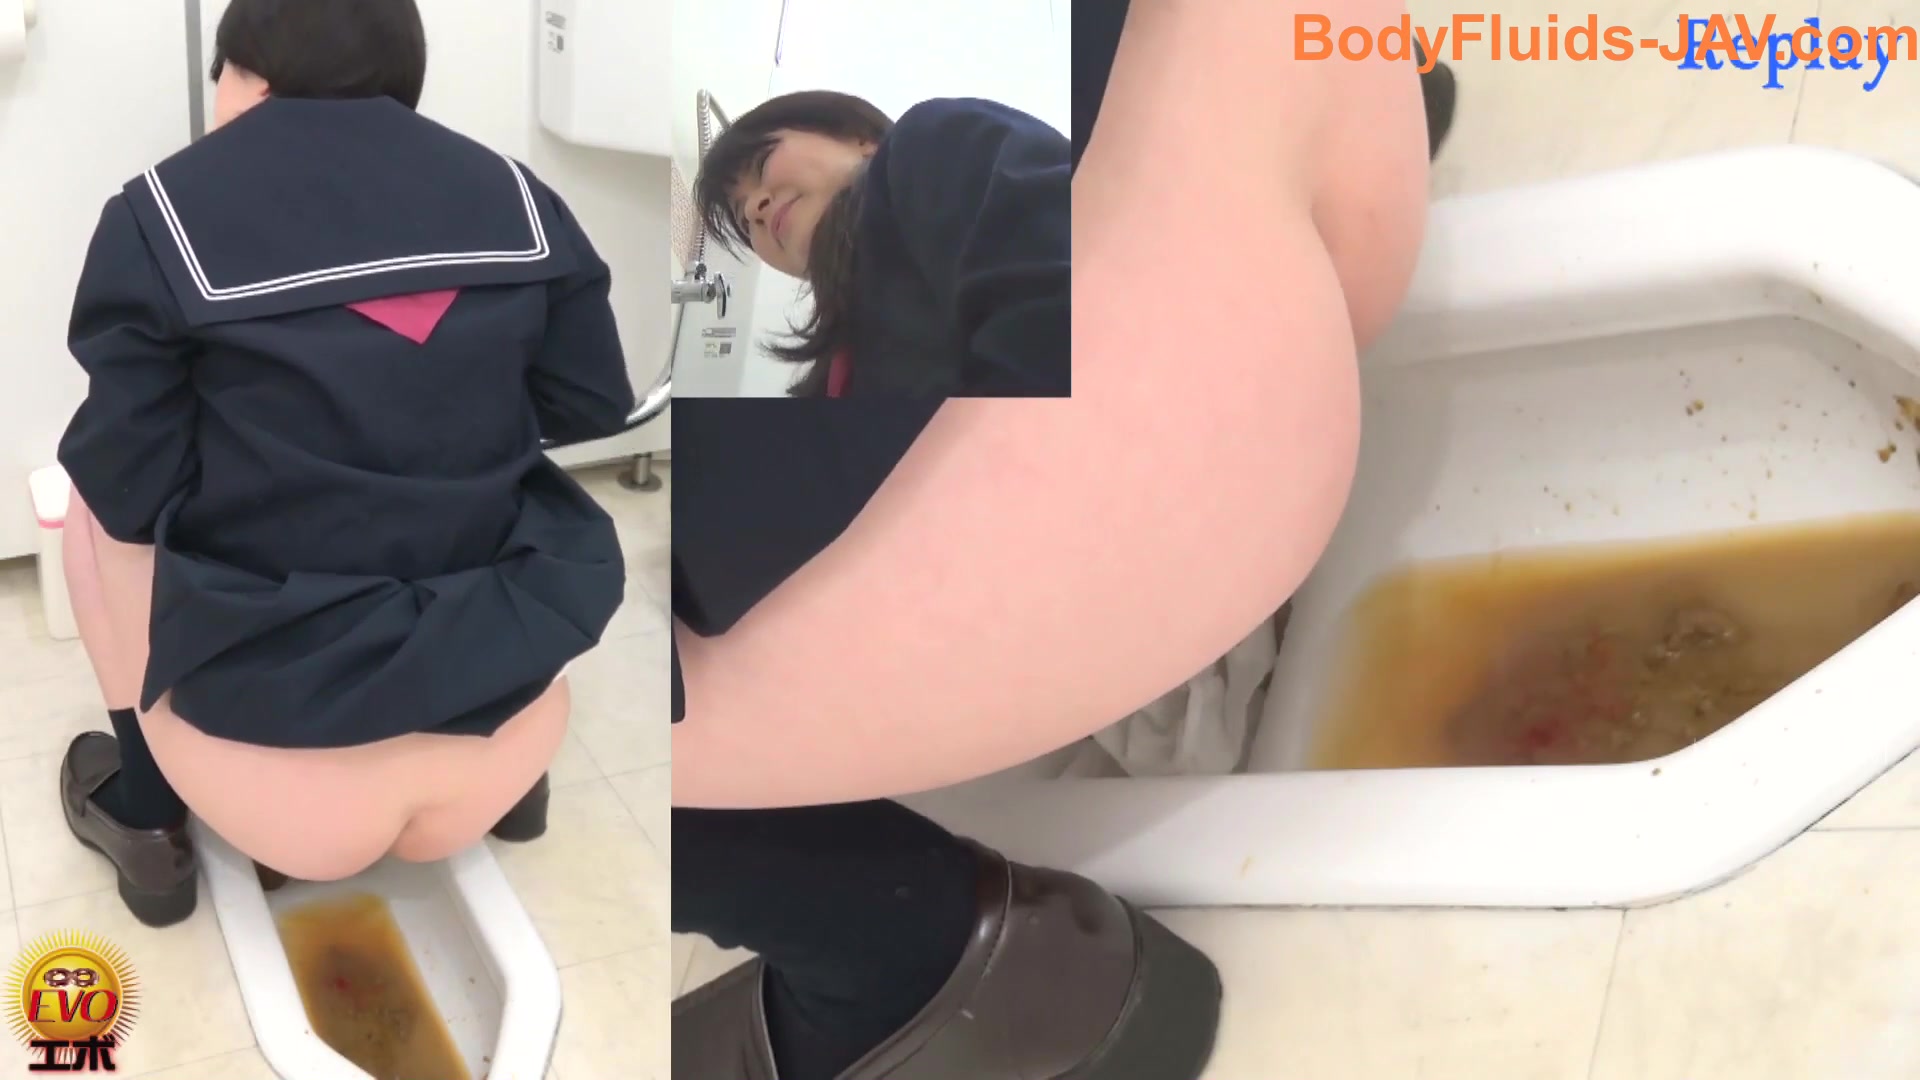 Lunchroom Porn - Bad School Lunch 19 - ScatFap.com - scat porn search - FREE videos of  extreme kaviar and copro sex, dirty shit eating and smearing